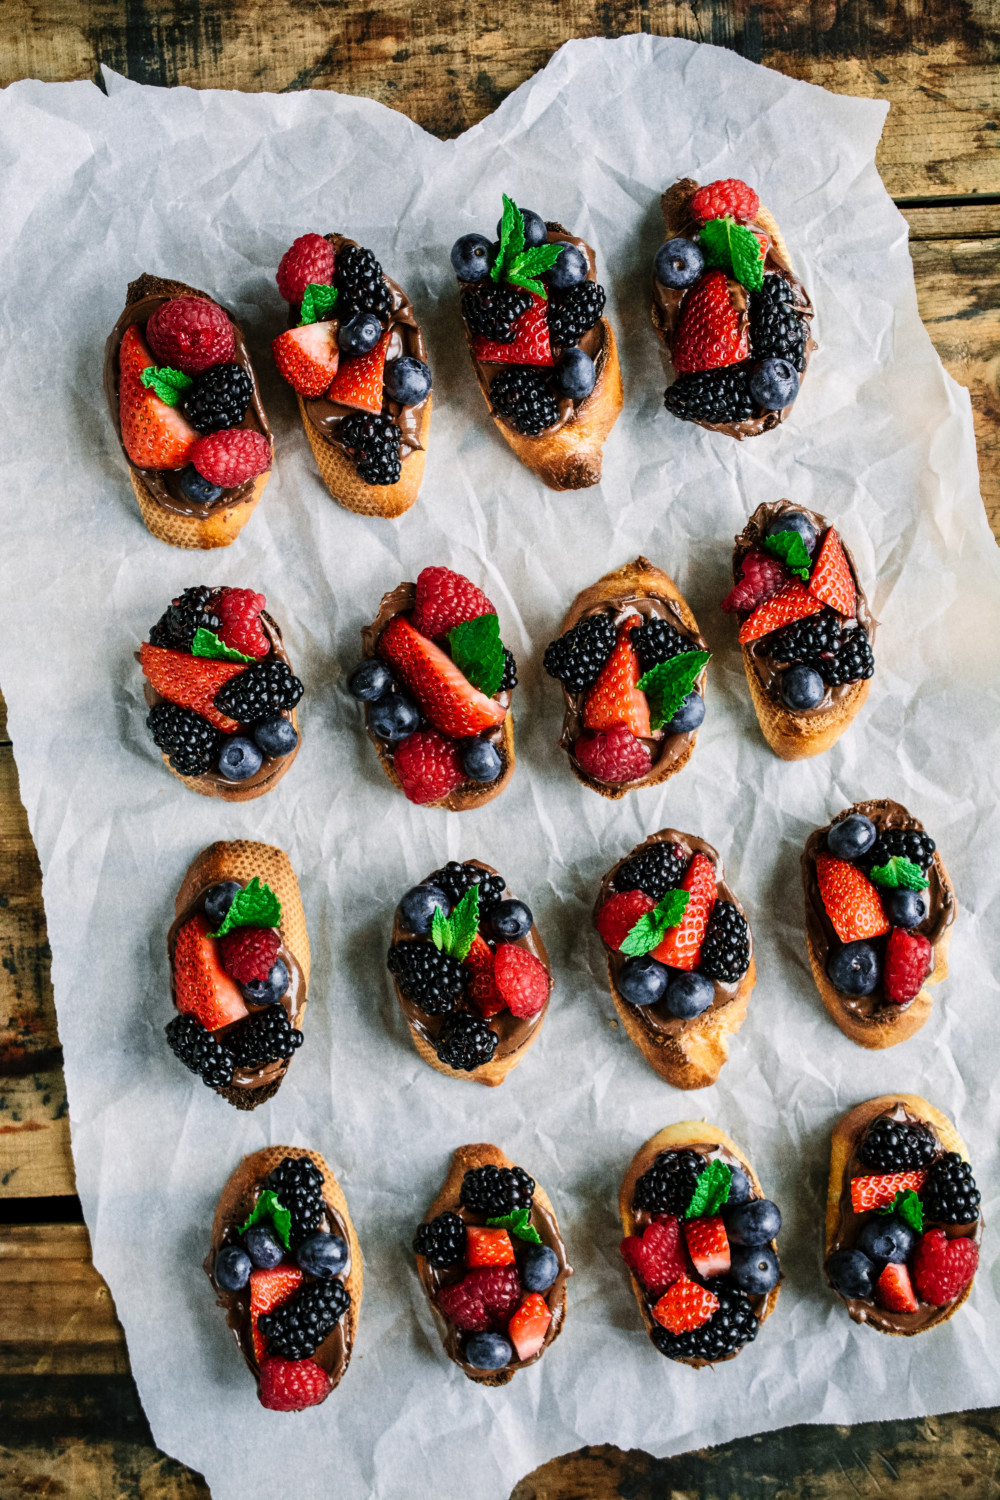 Fresh Berry & Nutella Crostini are a must for Valentine's Day! ciaochowbambina.com #ValentinesDay #crostini #nutella #ciaochowbambina